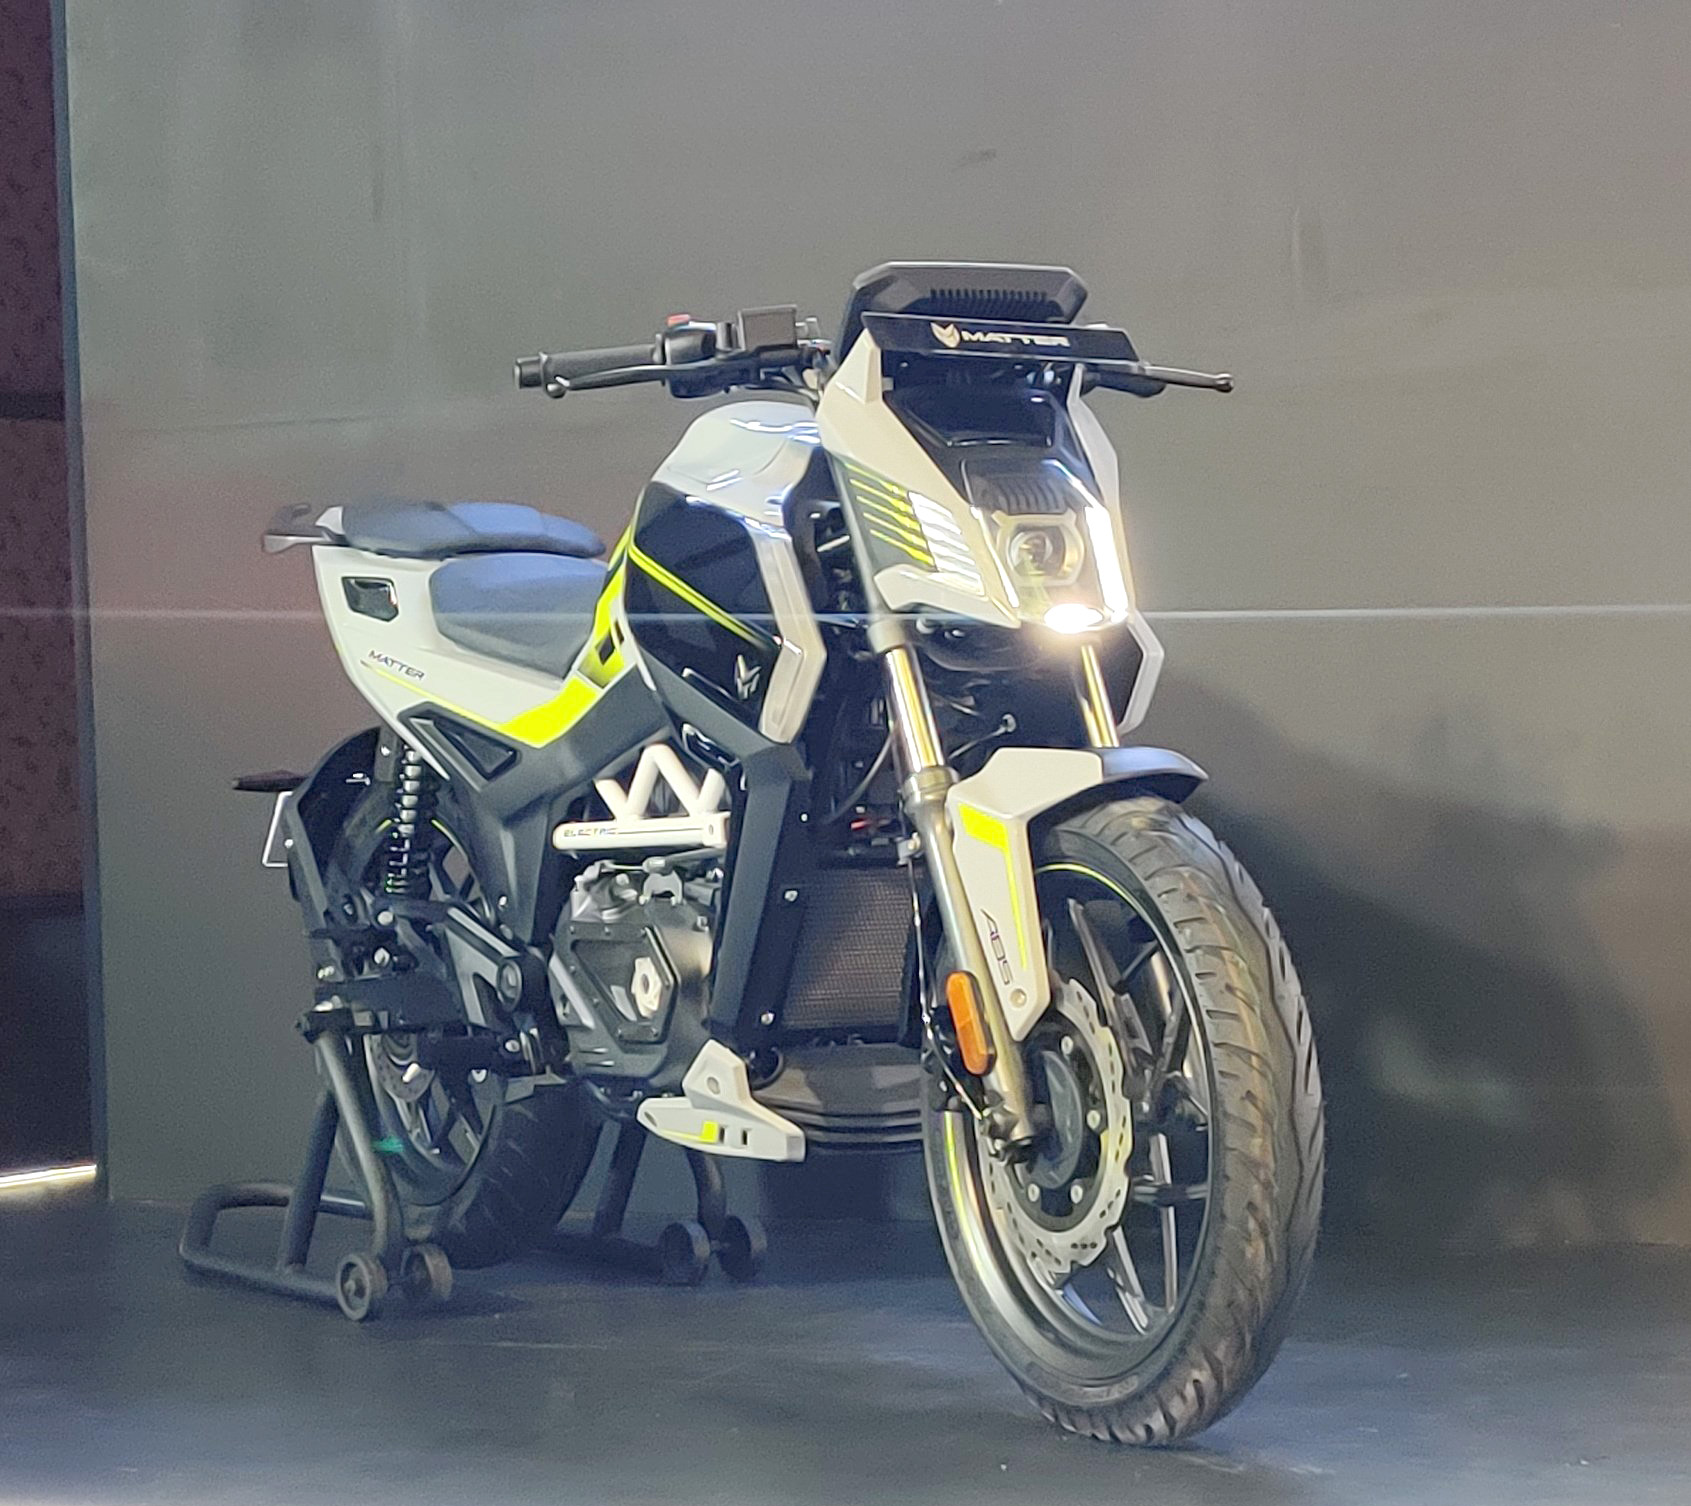 https://e-vehicleinfo.com/matter-unveiled-made-in-india-electric-motorbike/